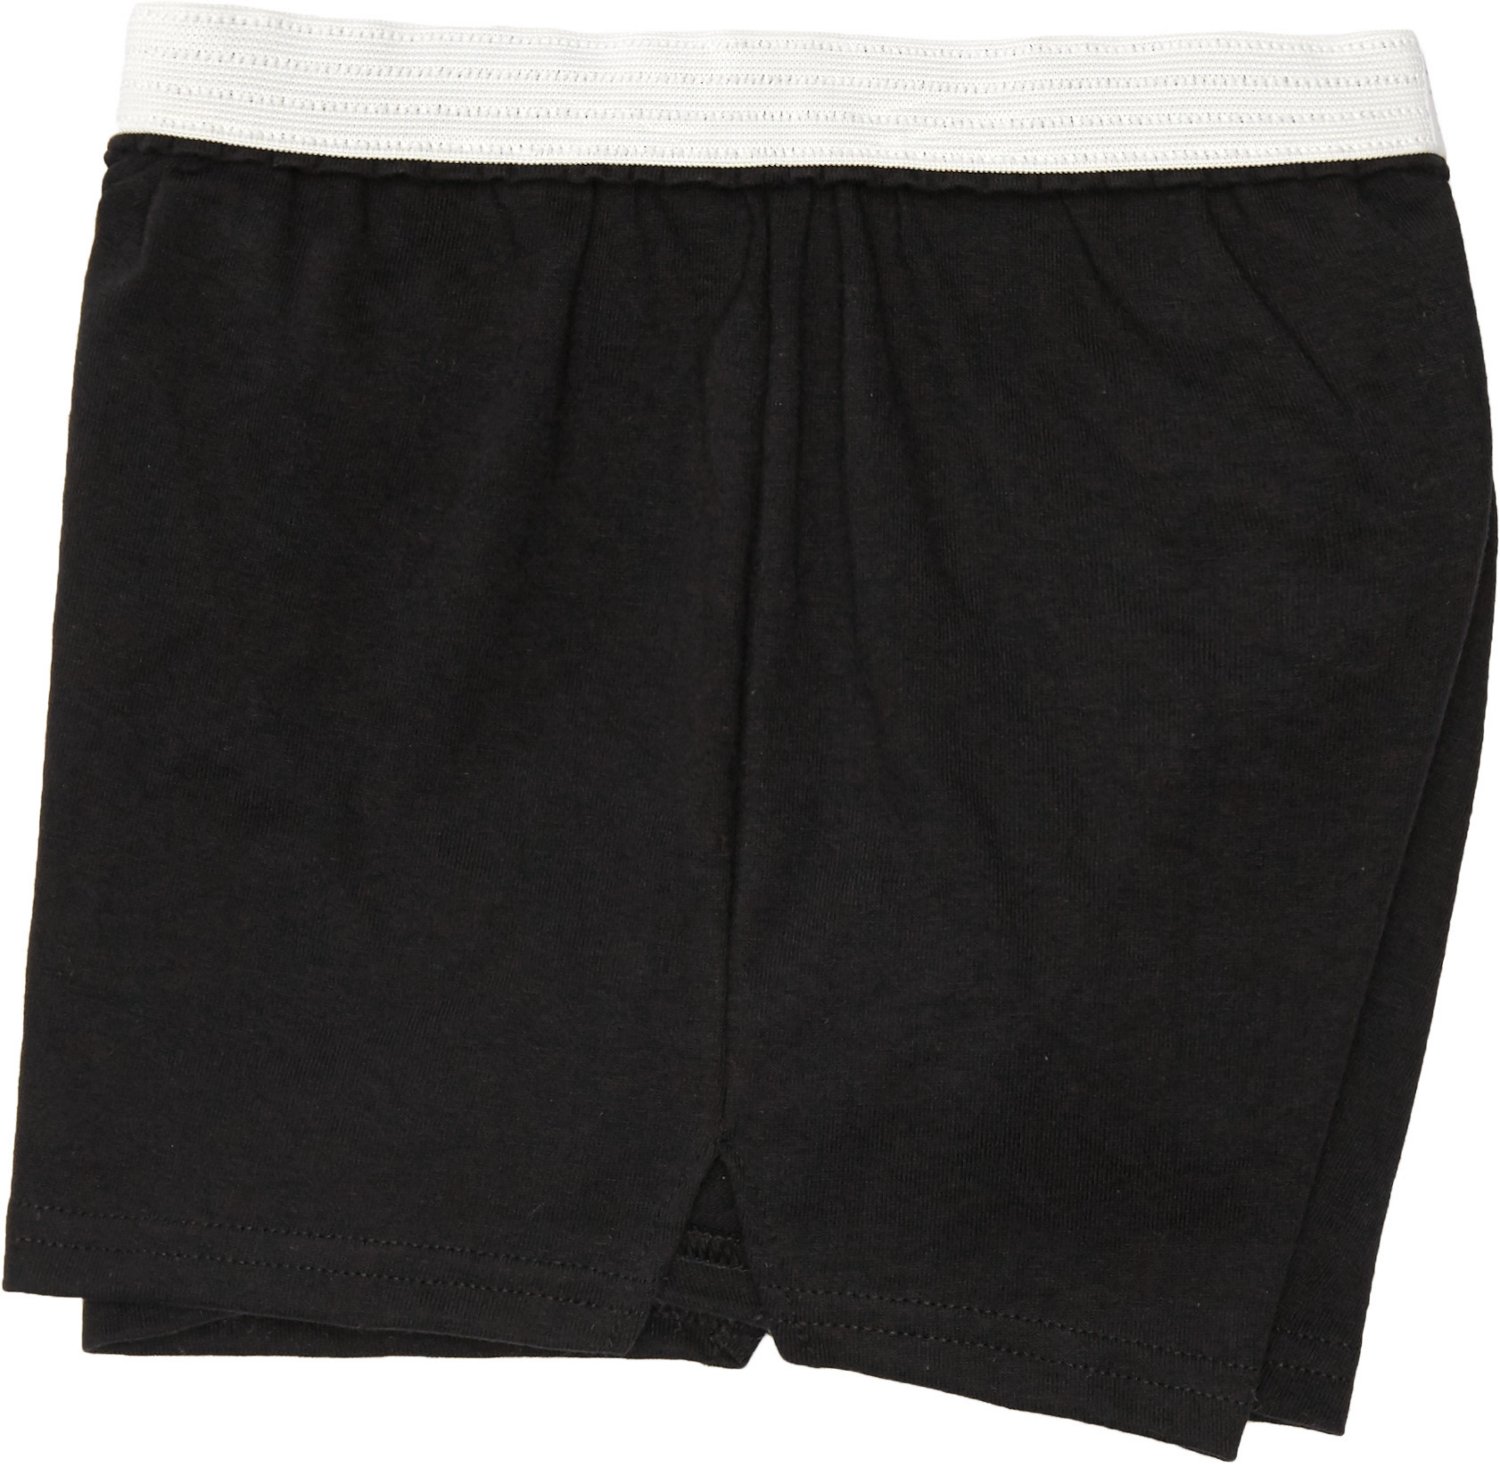 Soffe Juniors' Authentic Shorts | Academy